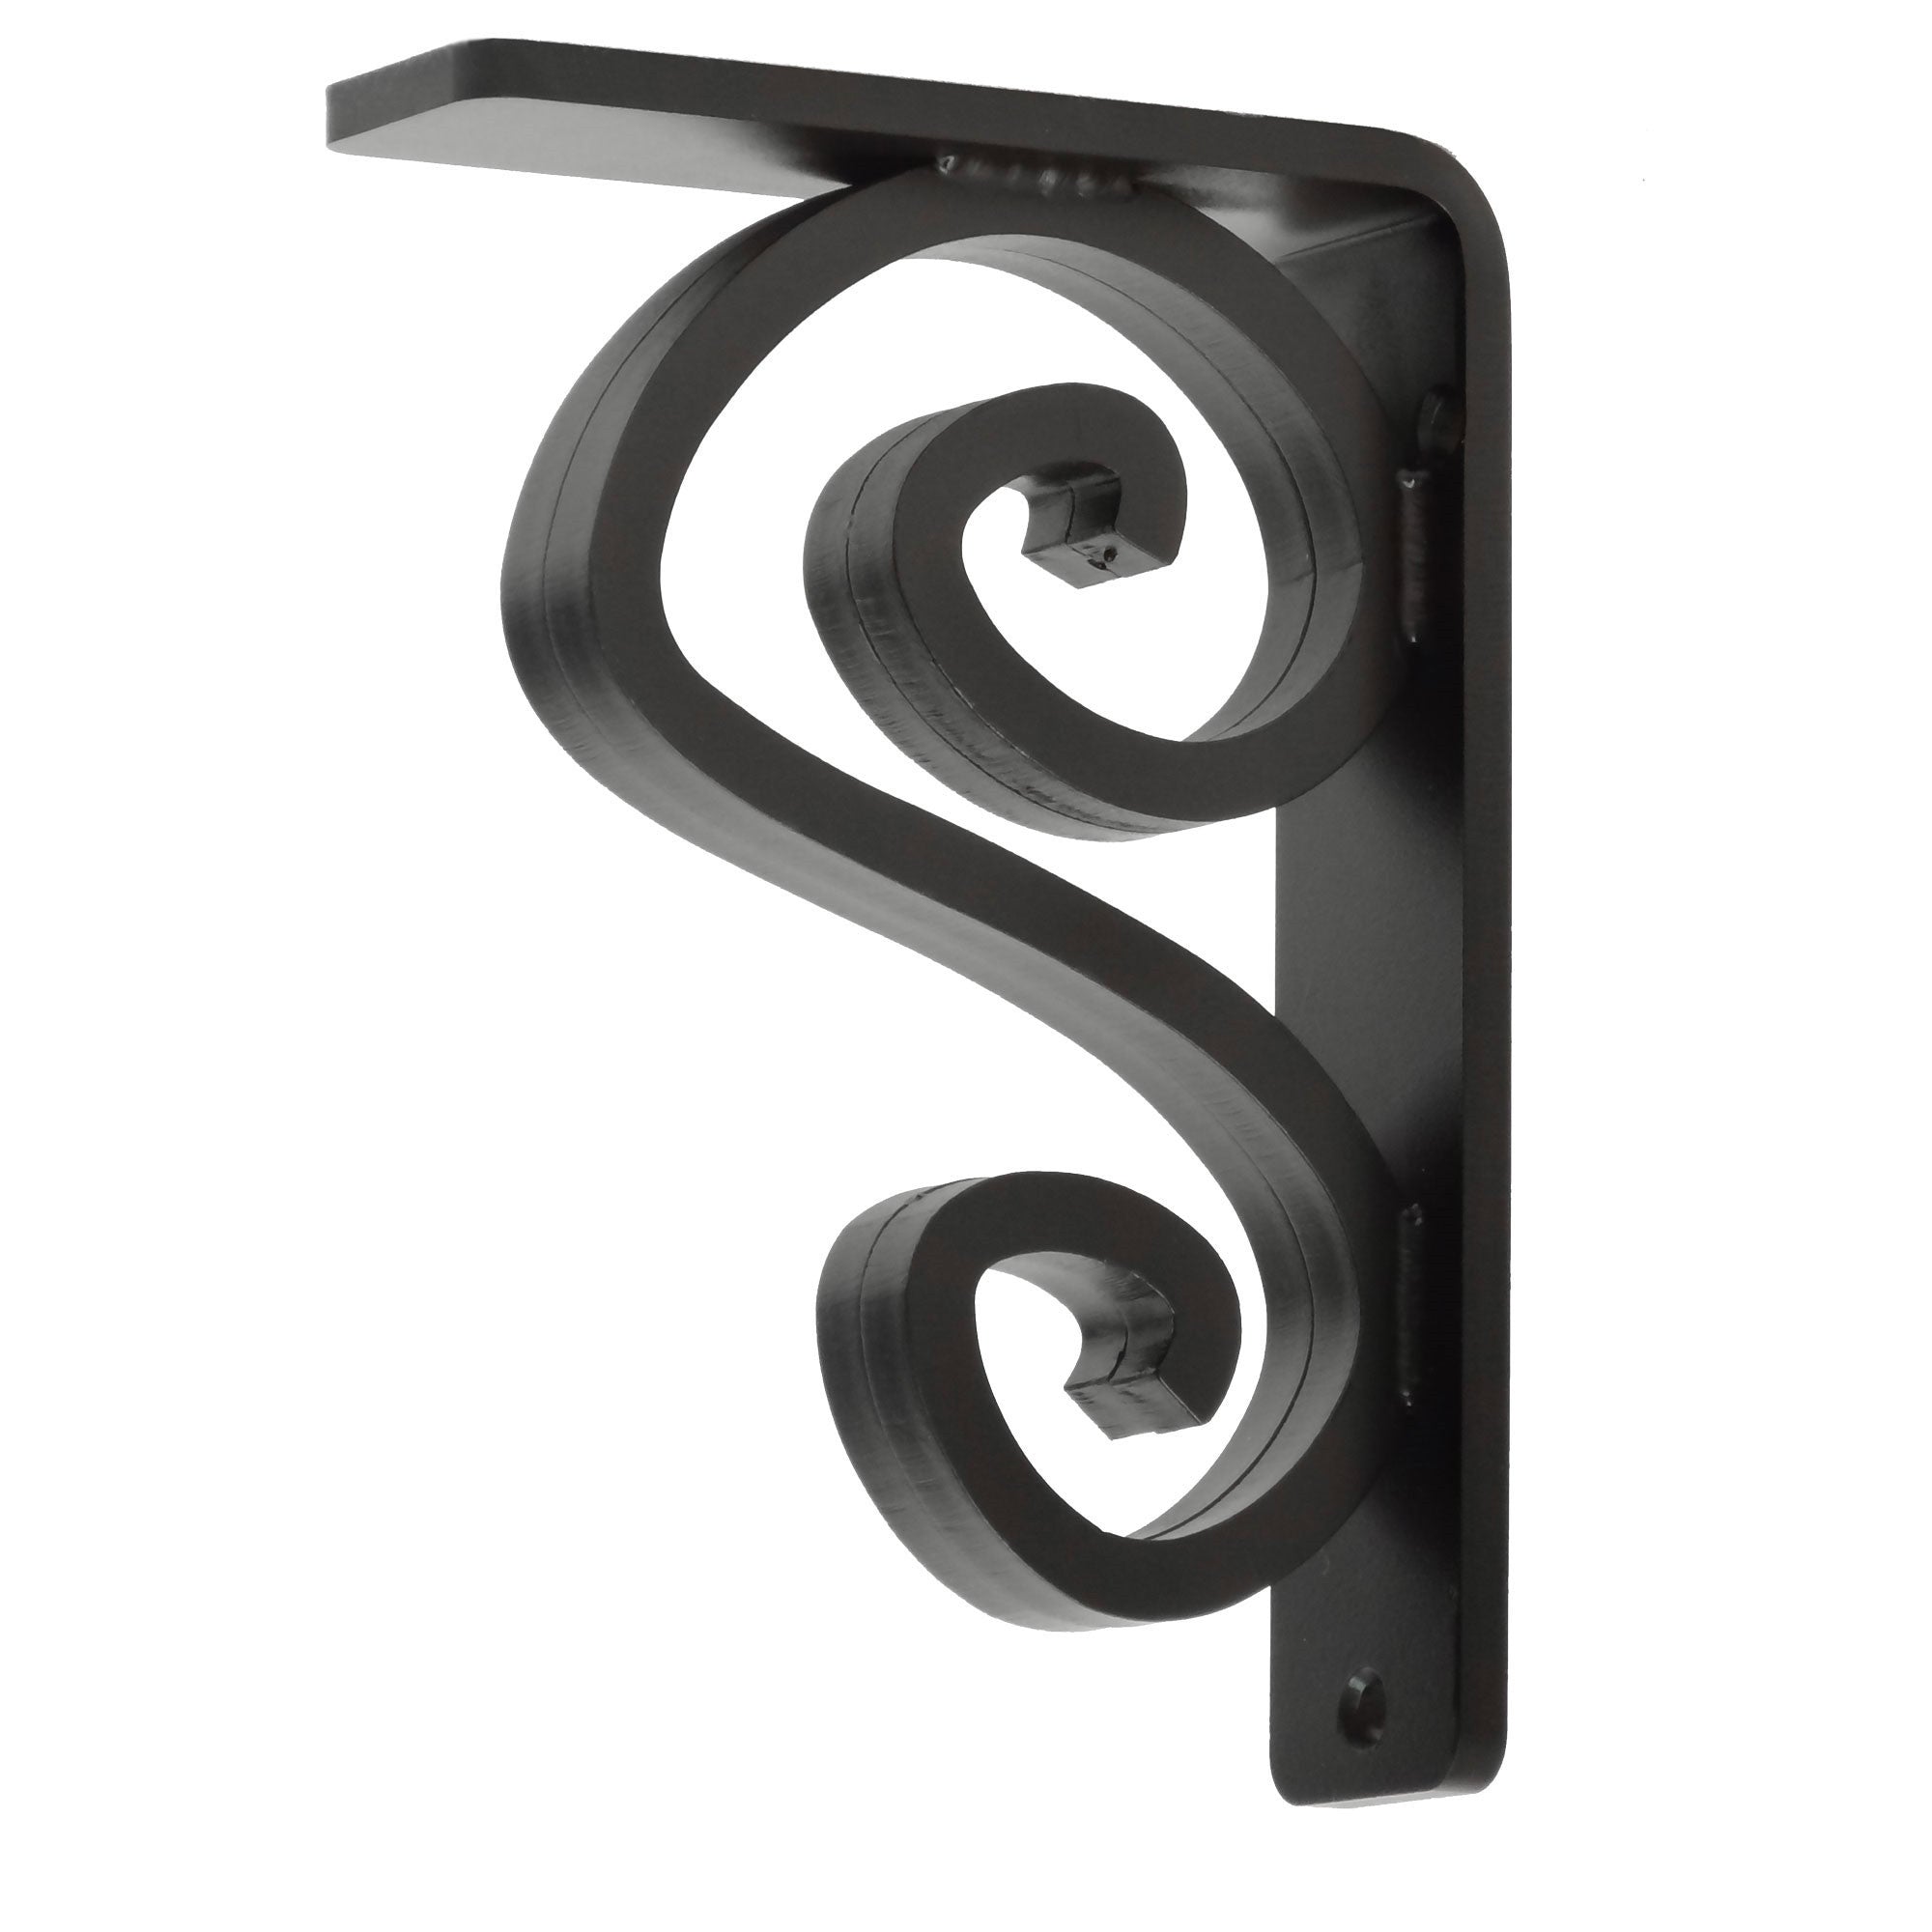 This is our 1.5-inch wide Arts and Crafts Corbel with Black Iron Finish.